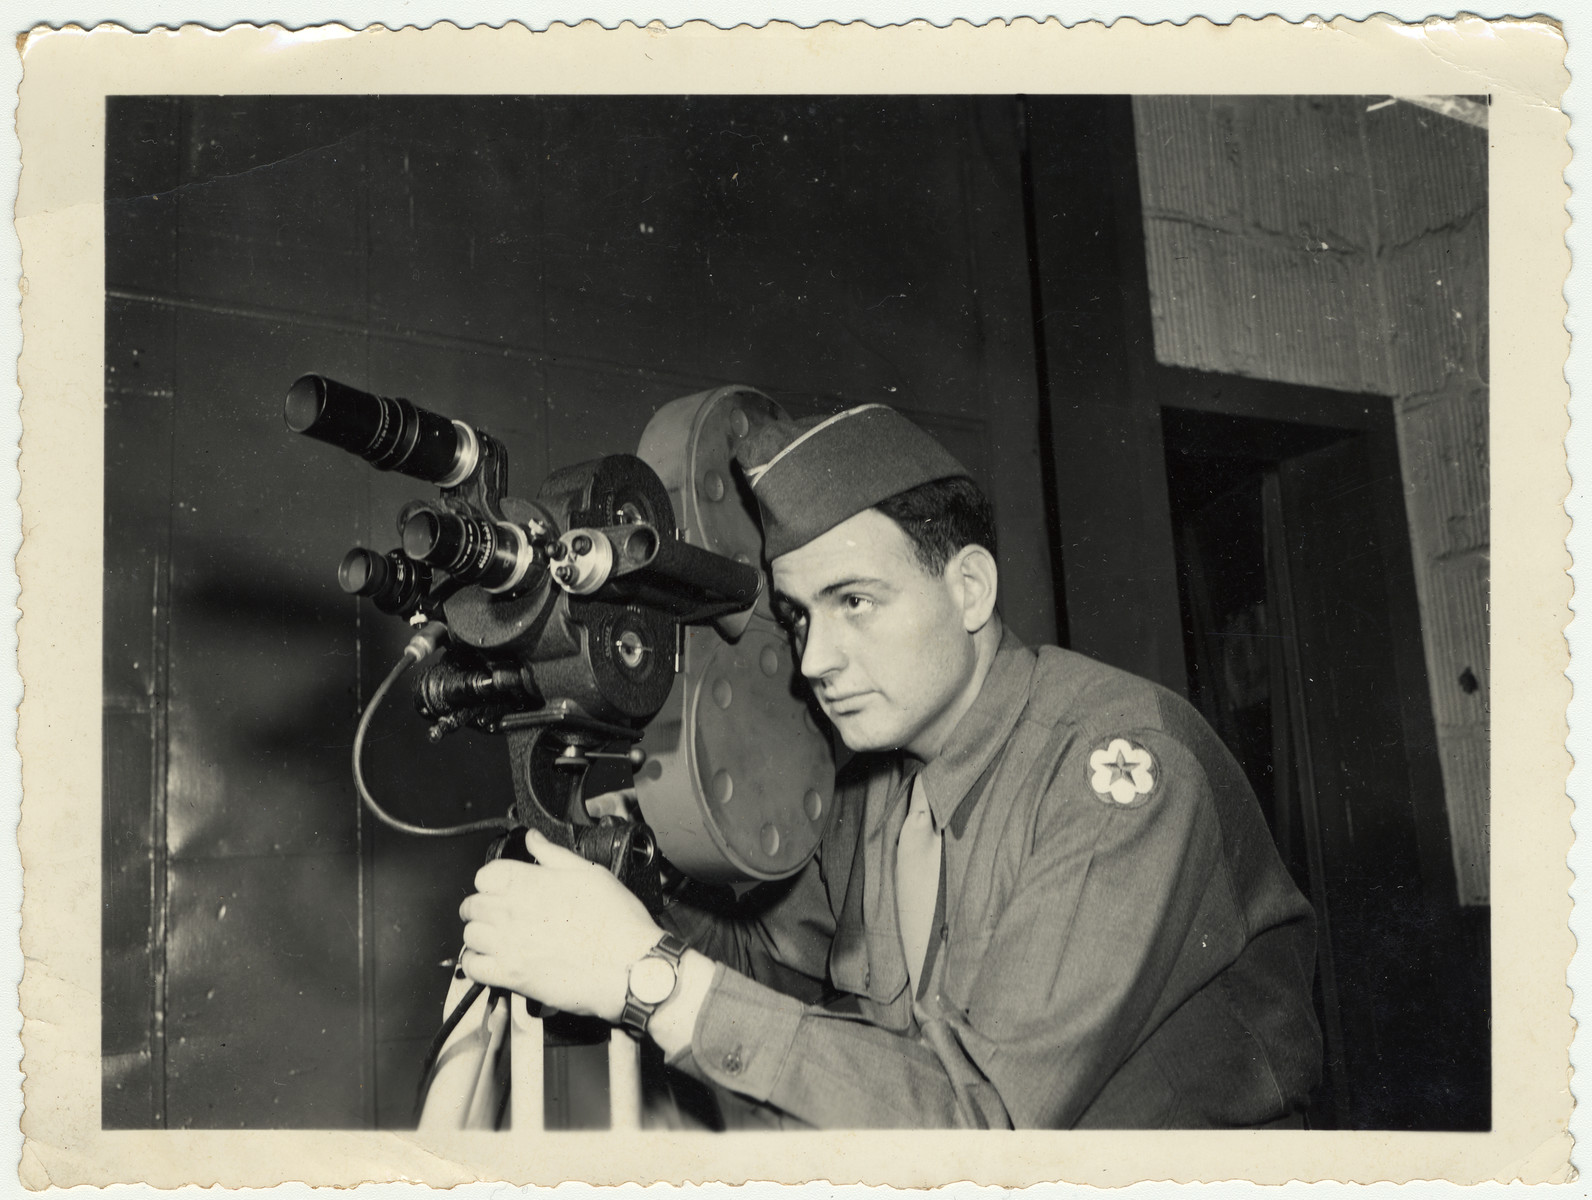 Portrait of American Jewish signal corps photographer Kurt Enfield with his movie camera.